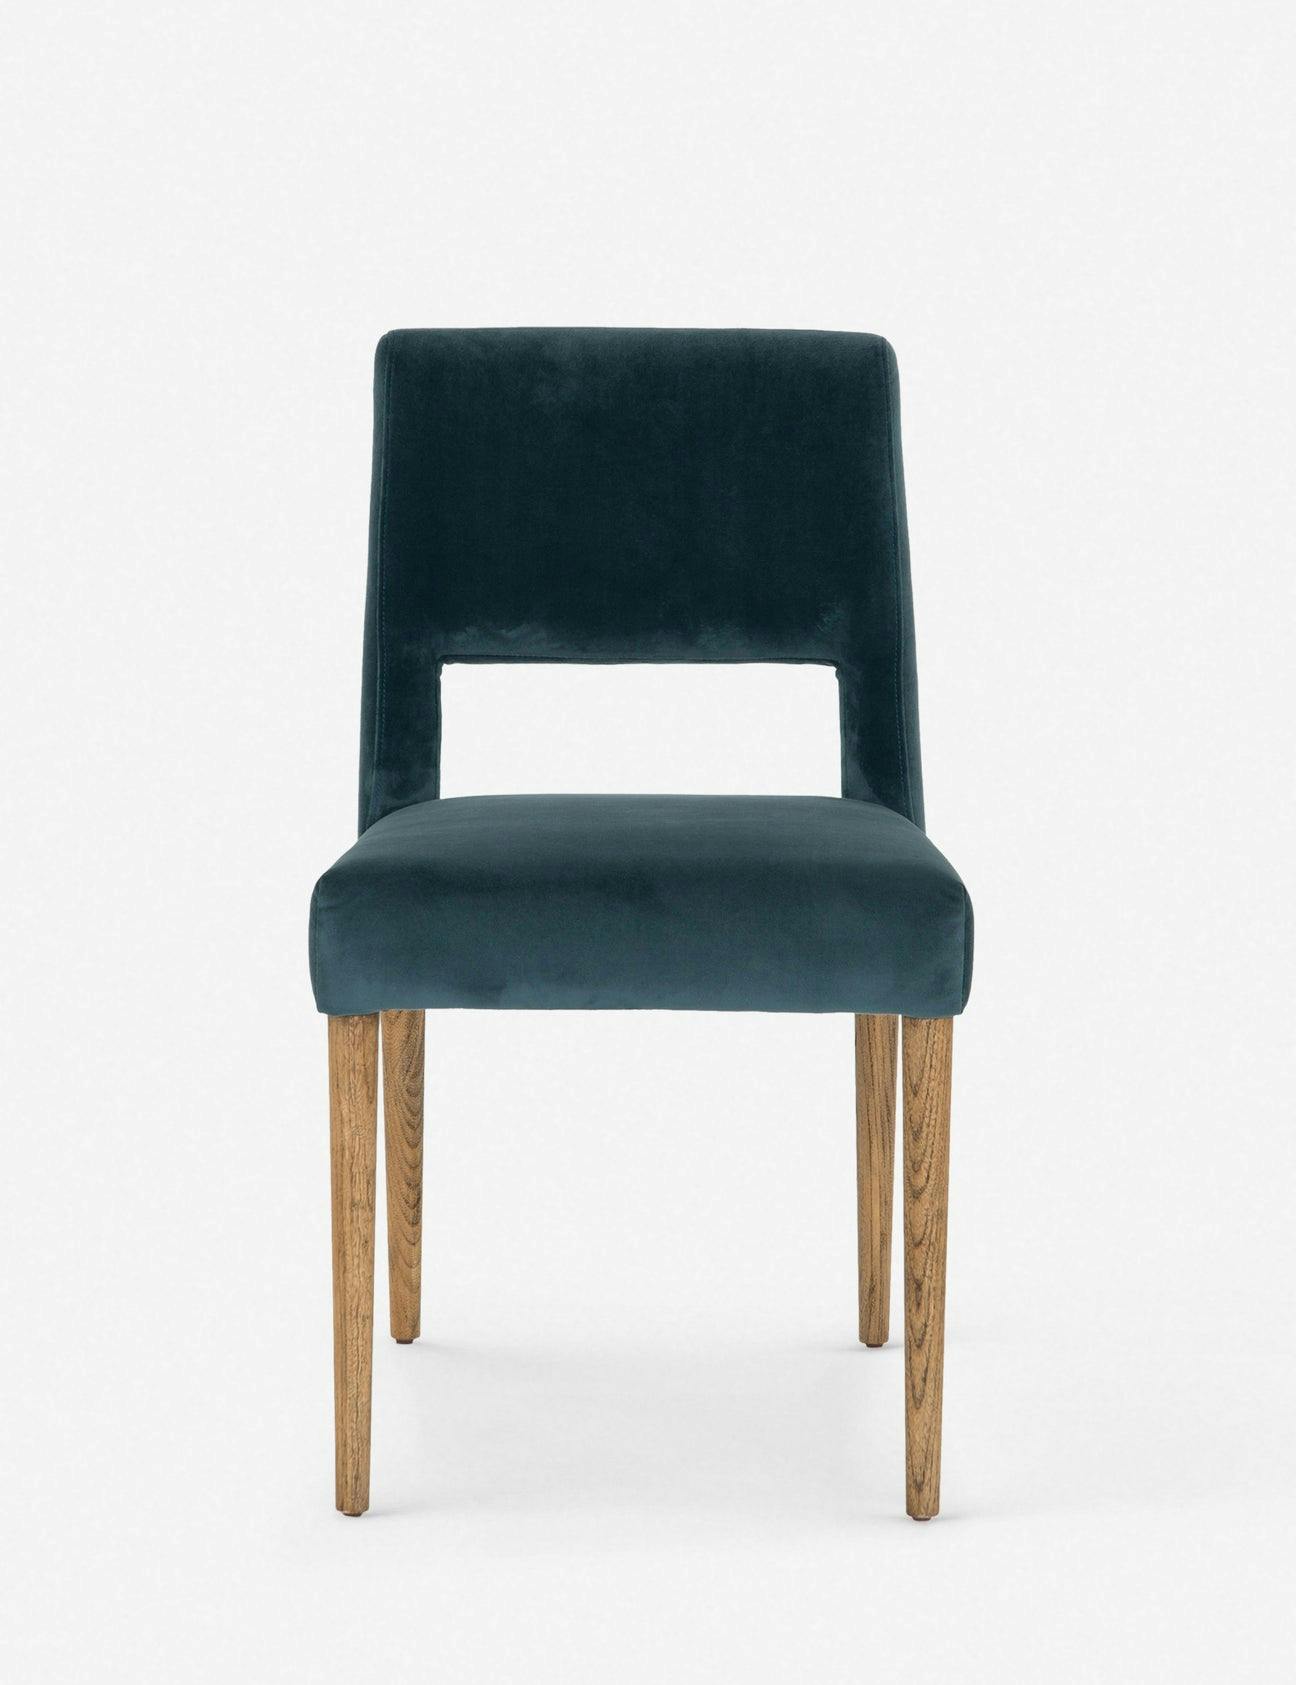 Ninette Dining Chair